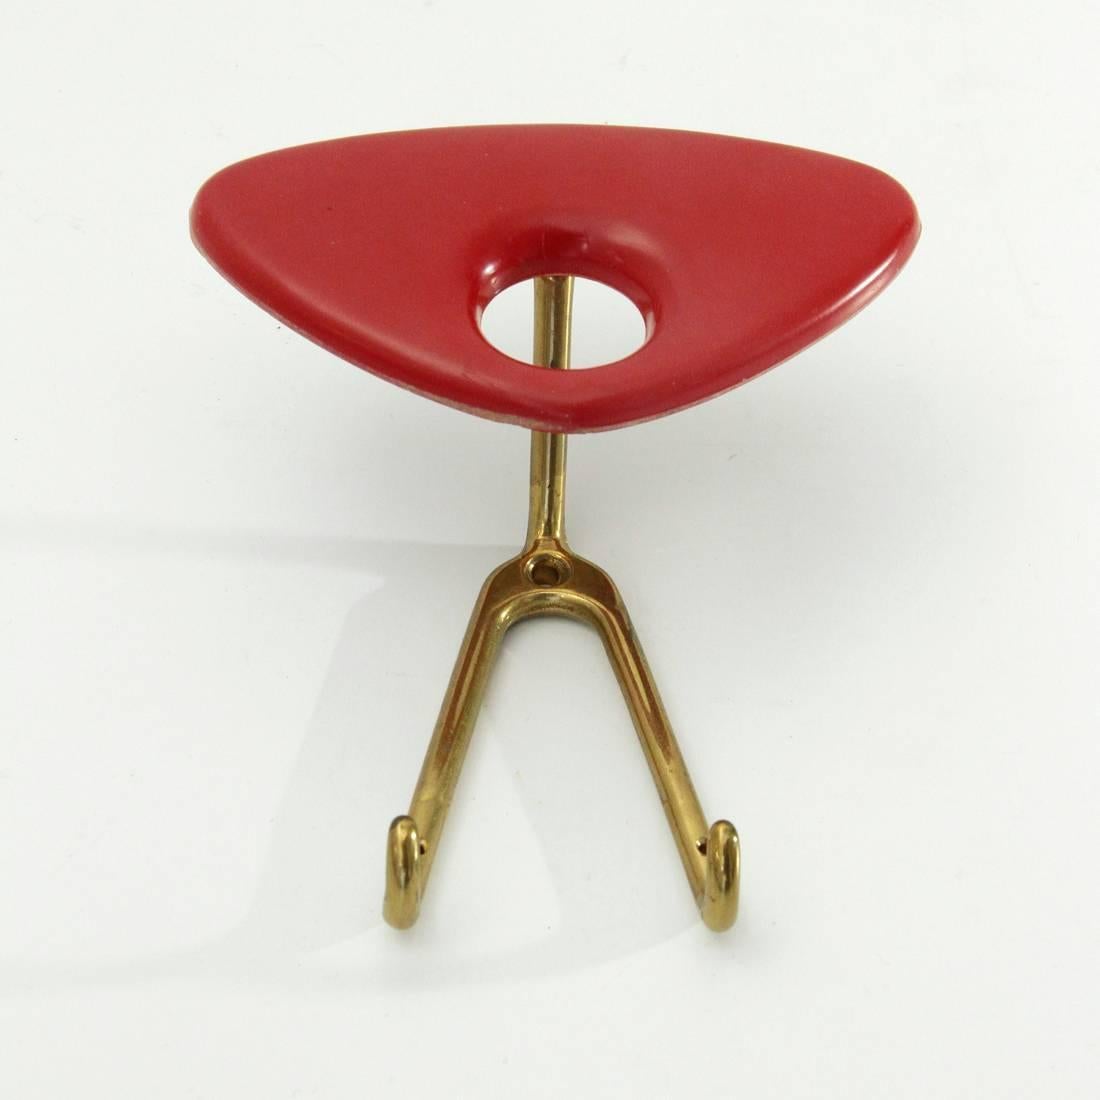 Coat hanger of Italian manufacture produced in the 1950s.
Brass structure and red plastic
Good general conditions.

Dimensions: Width 13.5 cm, depth 7 cm, height 15 cm.